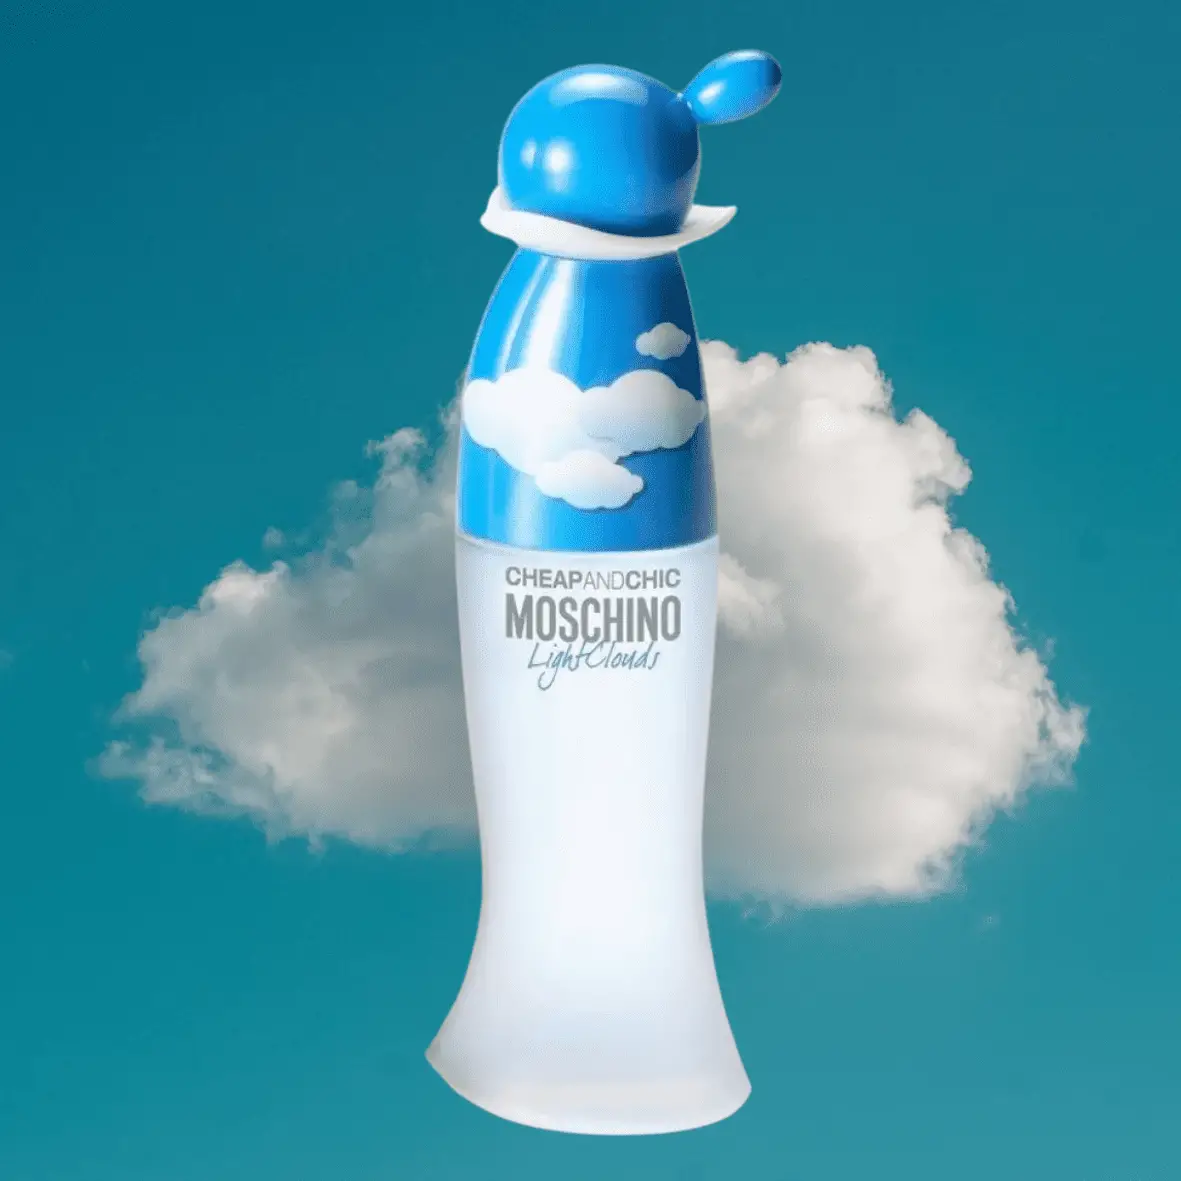 Cheap & Chic Light Clouds Moschino
Perfumes That Smell like Fresh Laundry 